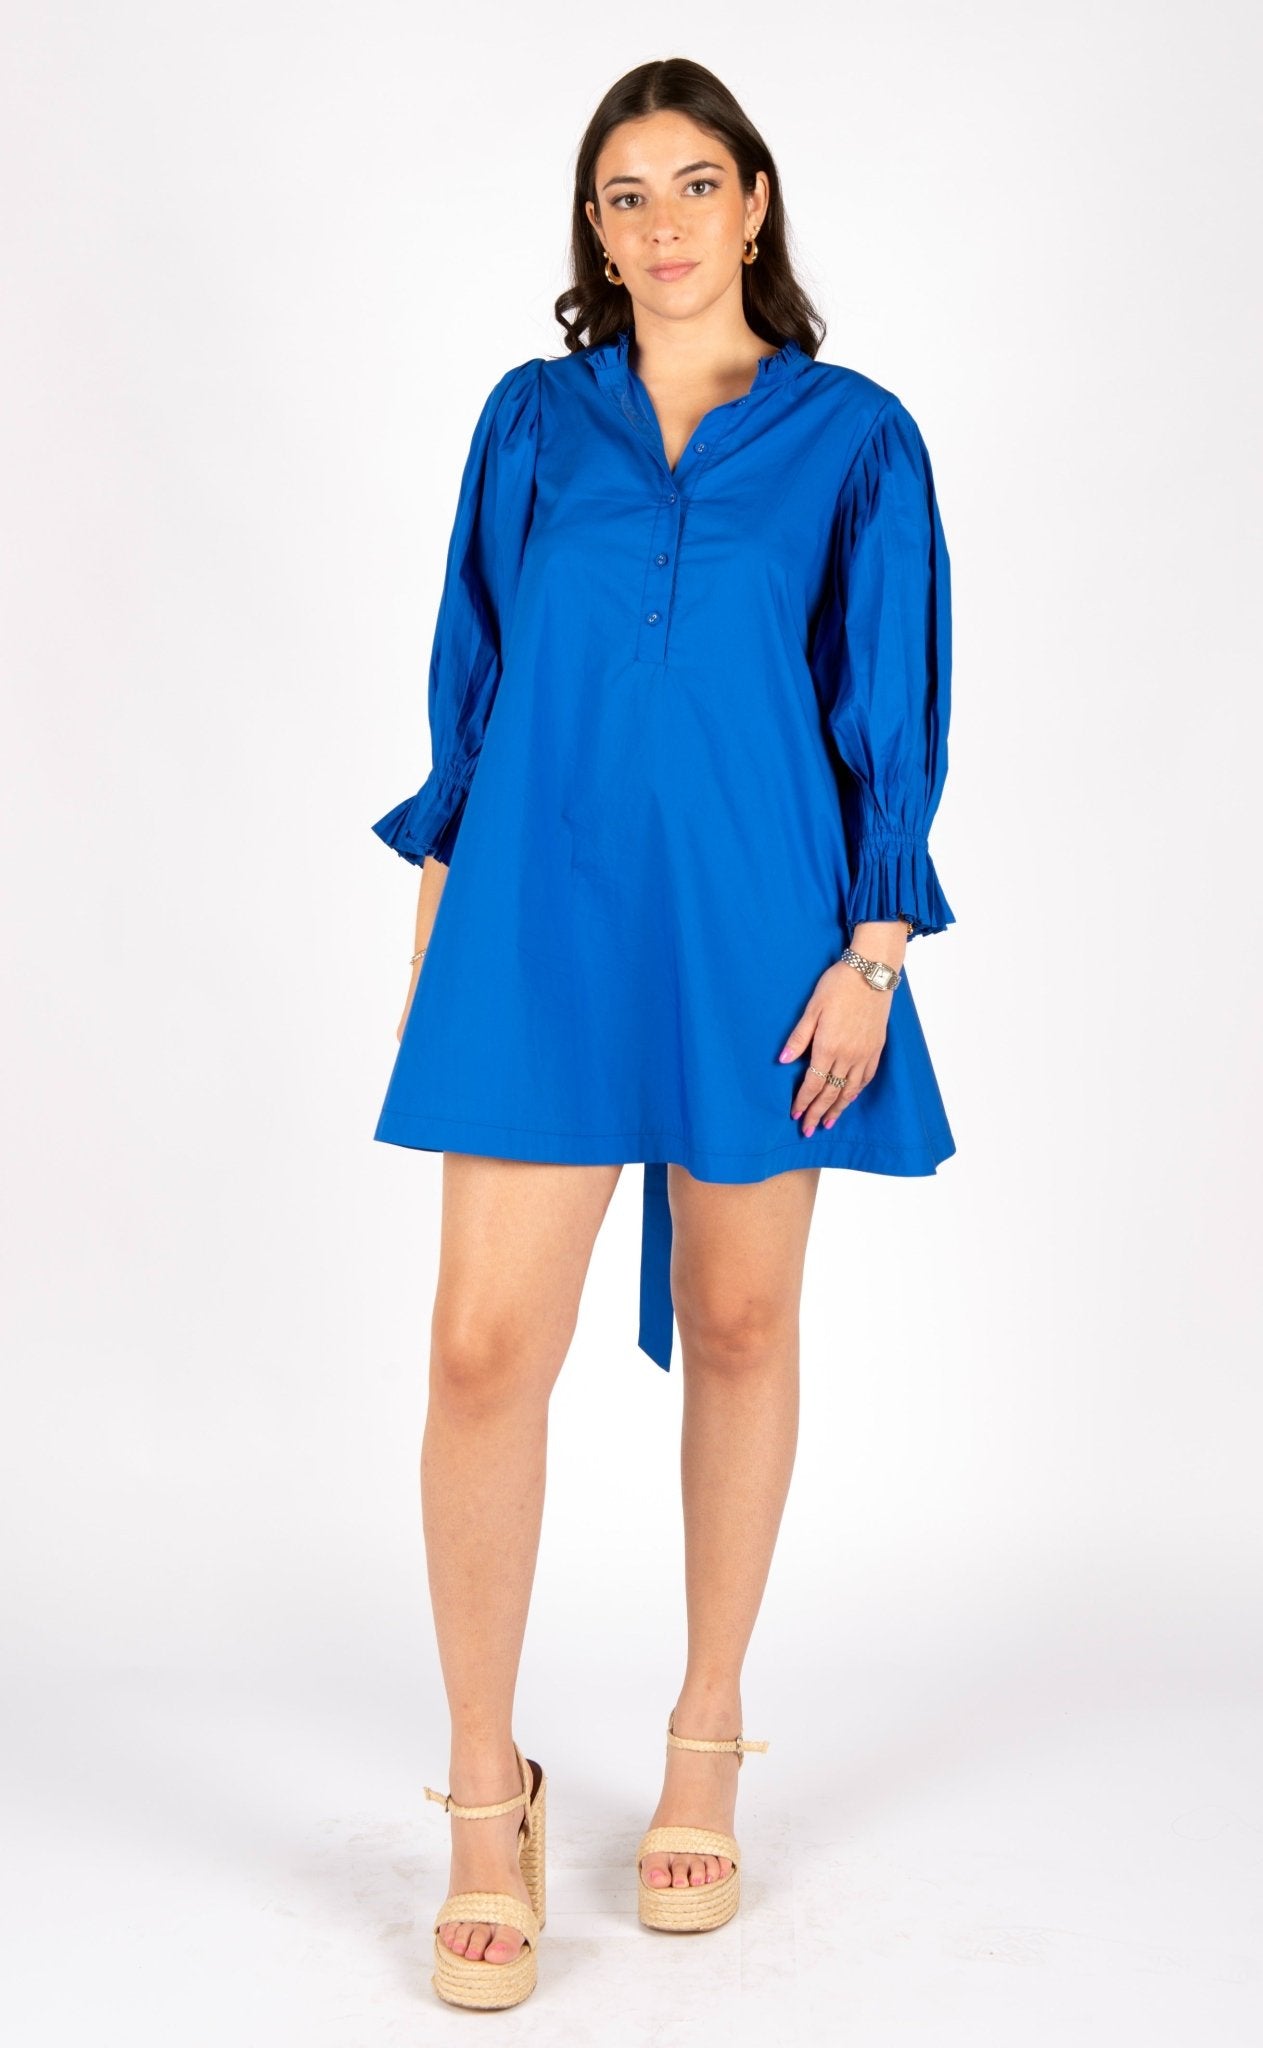 Sincerely Ours Park Cobalt Blue Poplin Mini Dress with Back TieDress